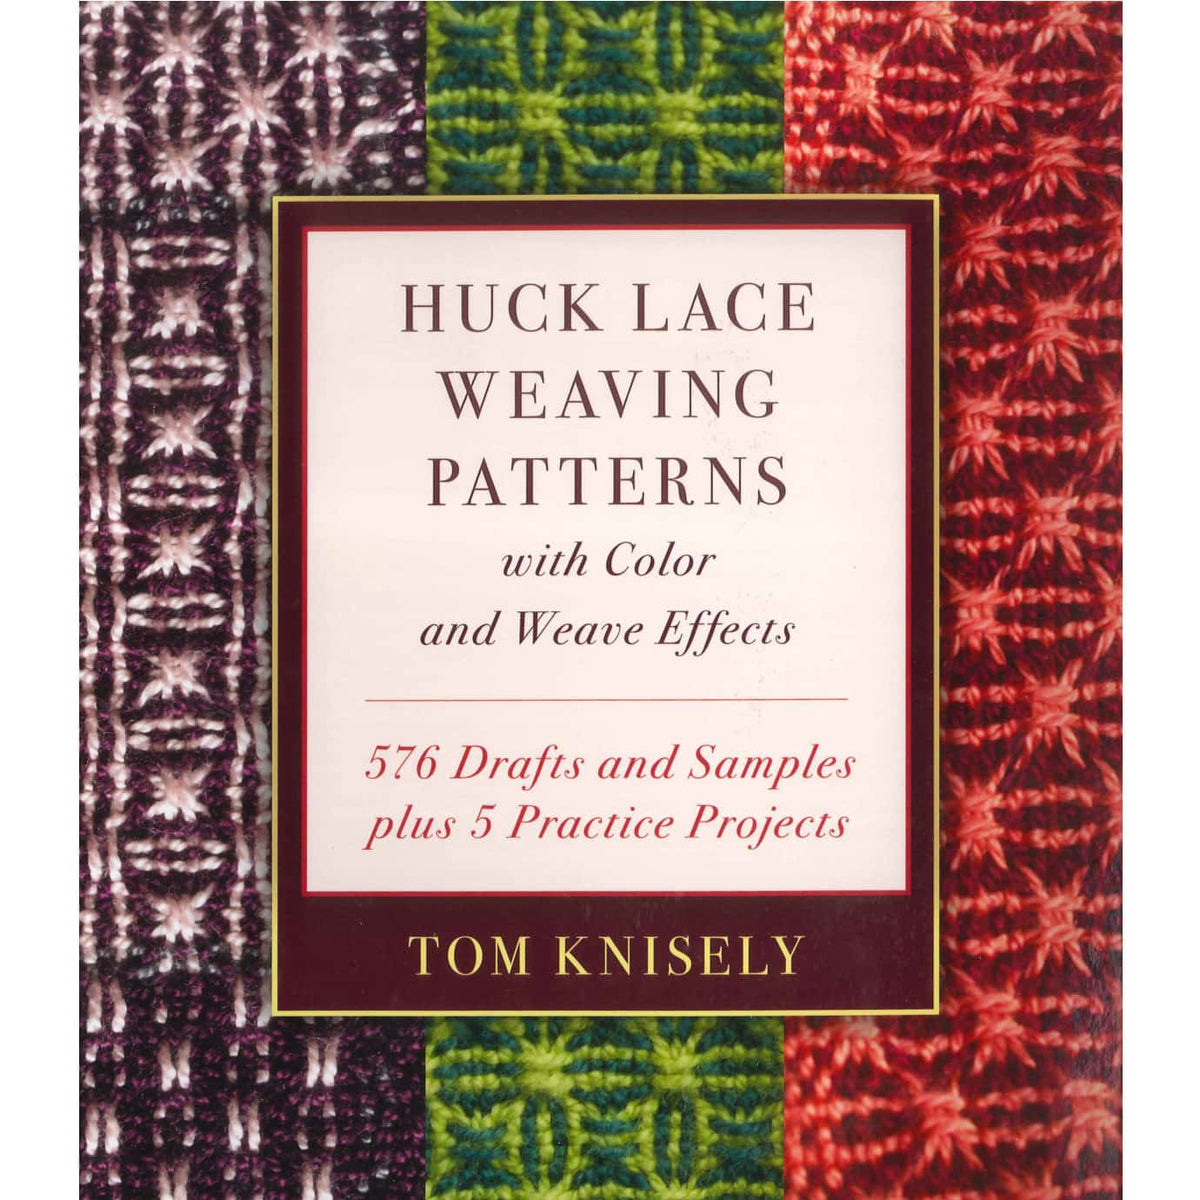 Huck Lace Weaving Patterns | Tom Knisely